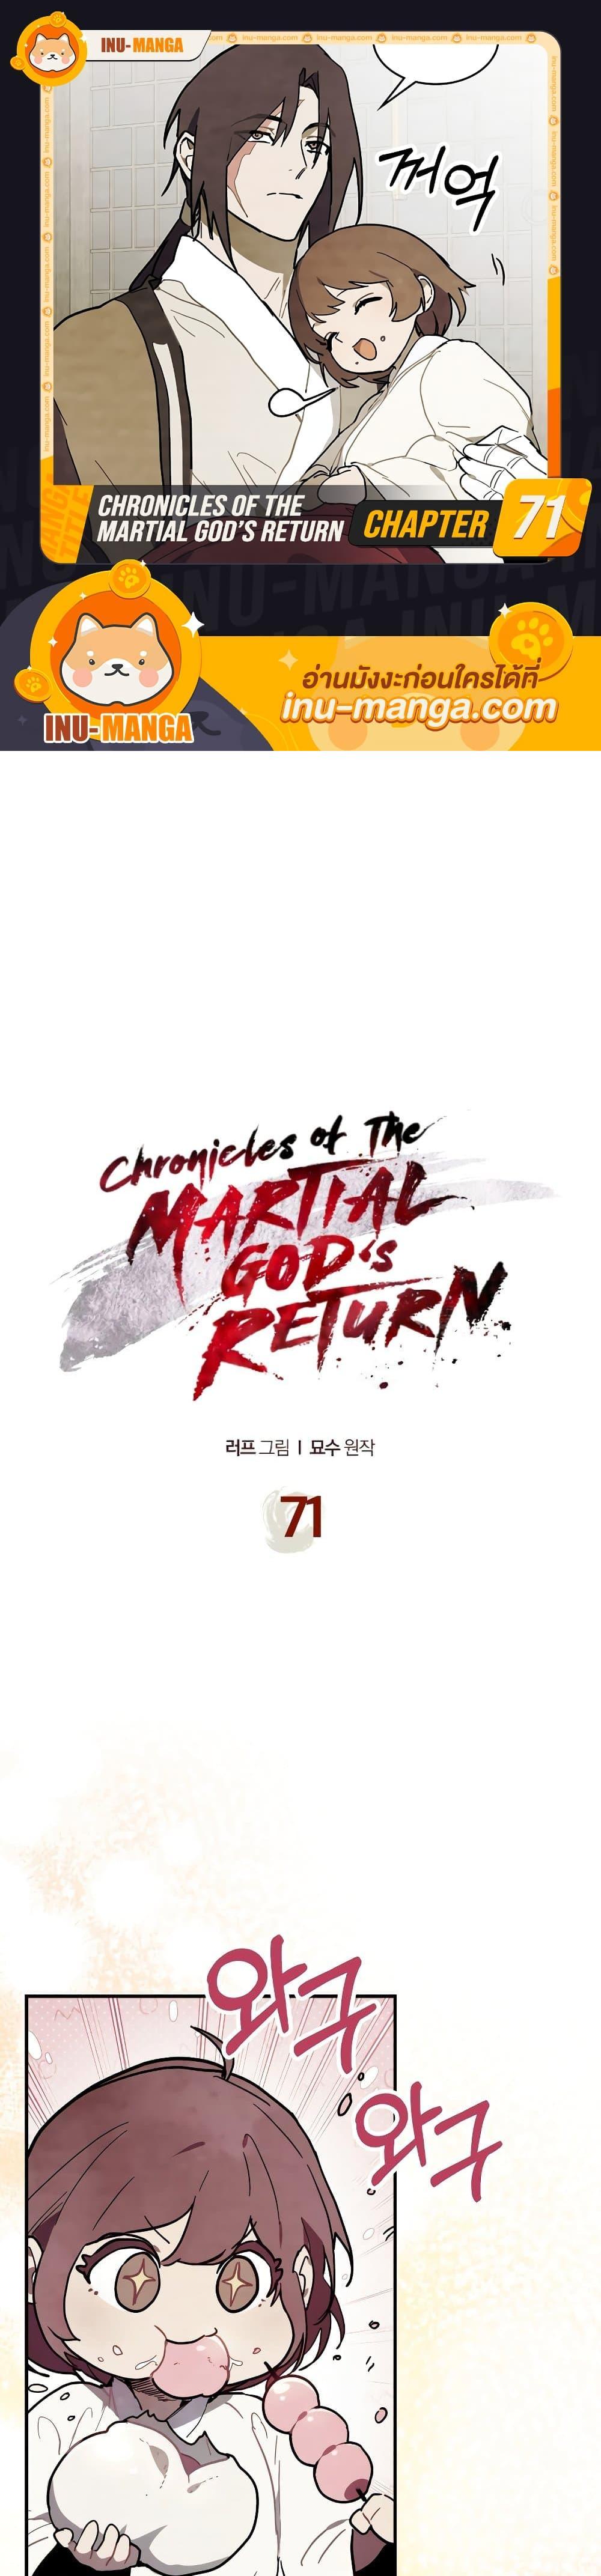 Chronicles Of The Martial God’s Return ตอนที่ 71 (1)